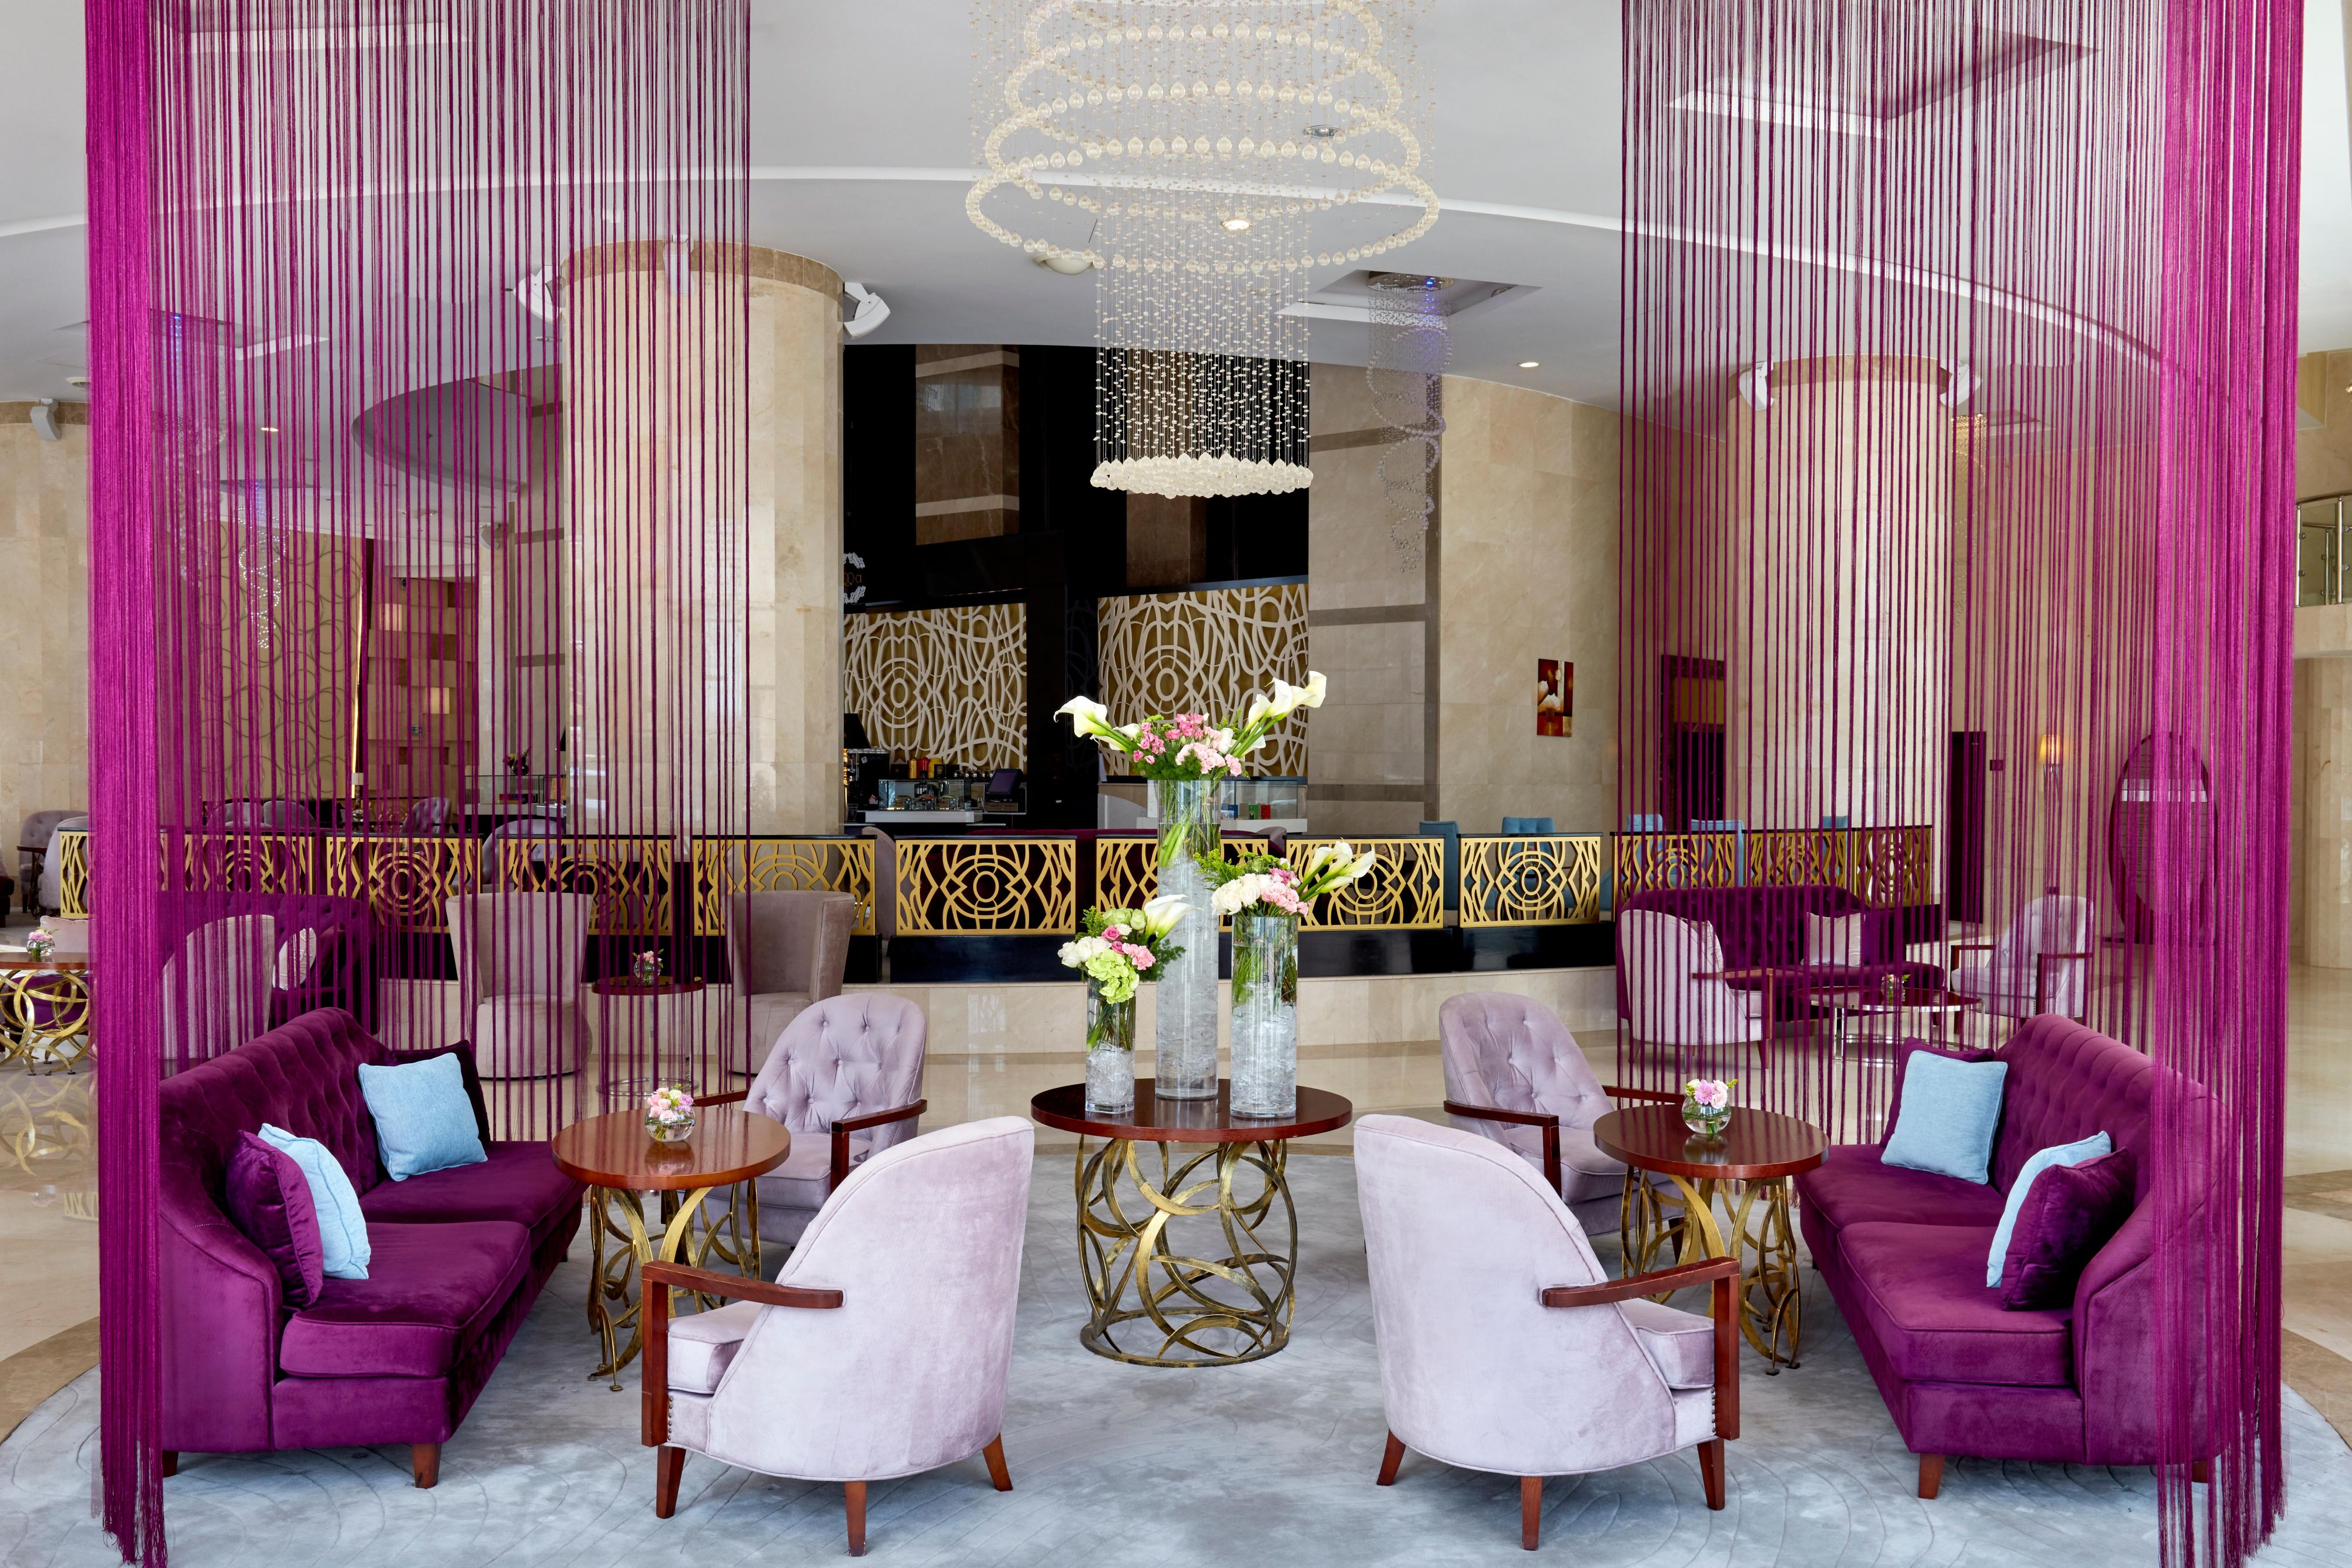 The hotel lobby depicts a stylish and modern elegance